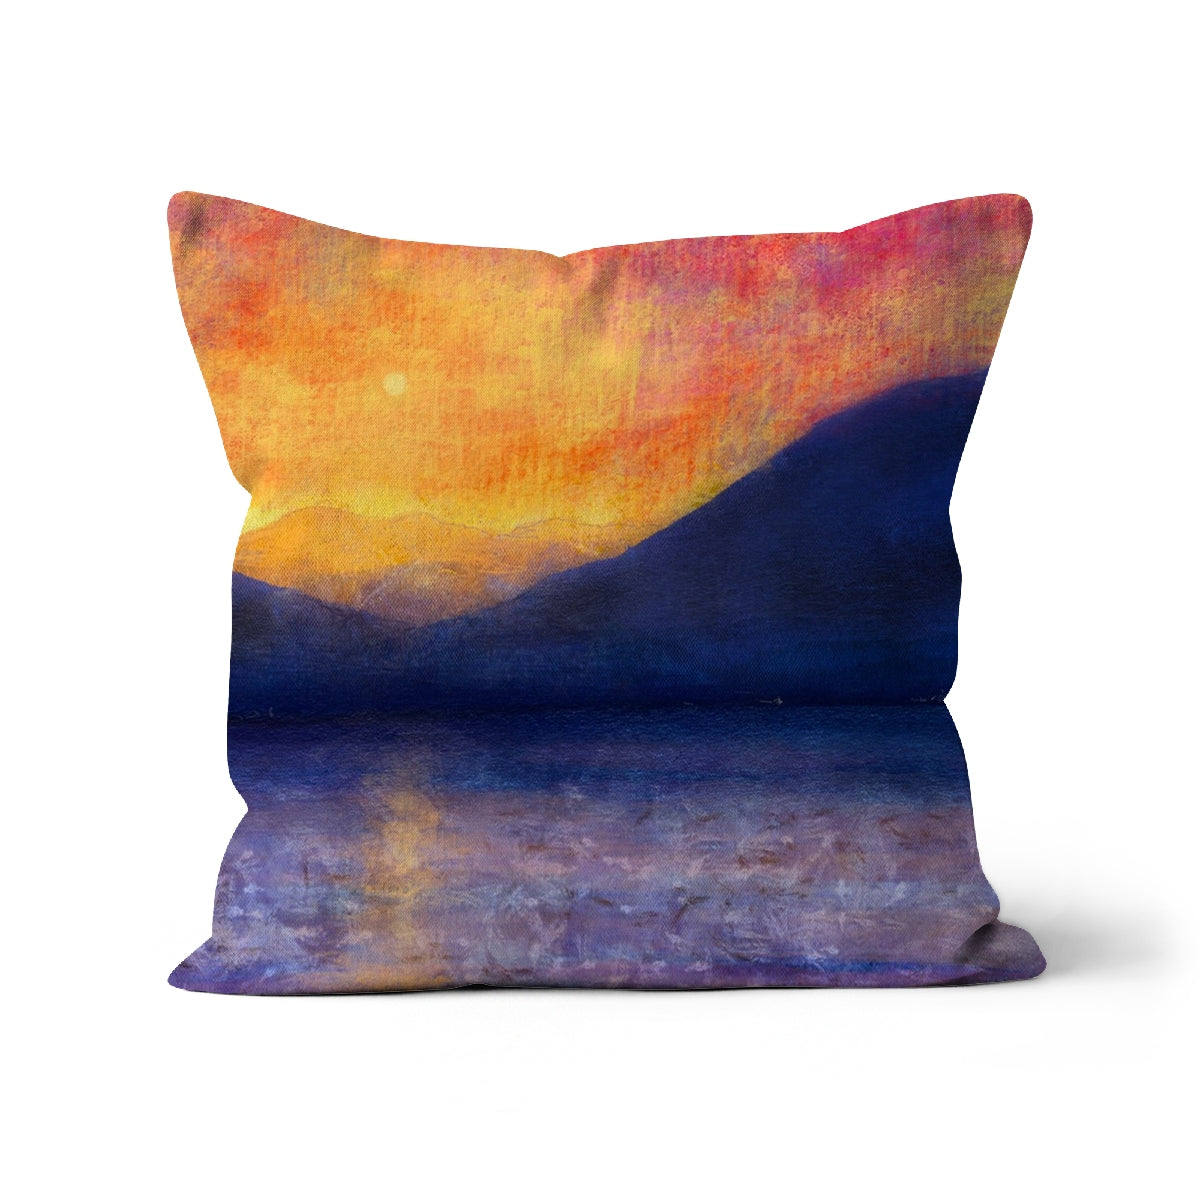 Sunset Approaching Mull Art Gifts Cushion-Cushions-Hebridean Islands Art Gallery-Linen-22"x22"-Paintings, Prints, Homeware, Art Gifts From Scotland By Scottish Artist Kevin Hunter